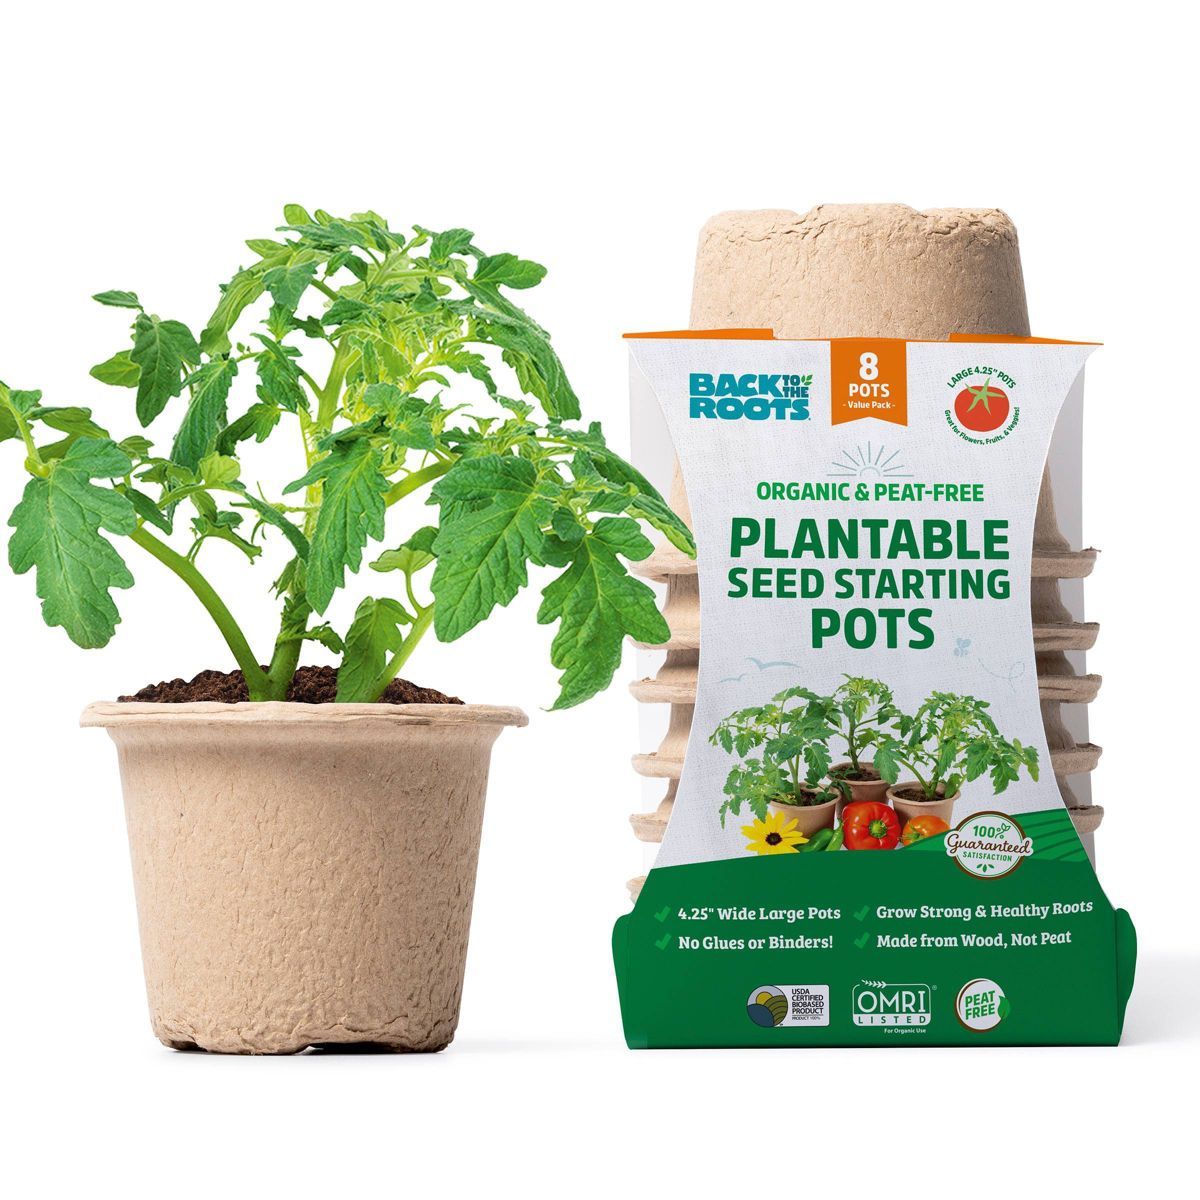 Back to the Roots 8pk Organic & Peat Free Plantable Seed Starting Pots | Target